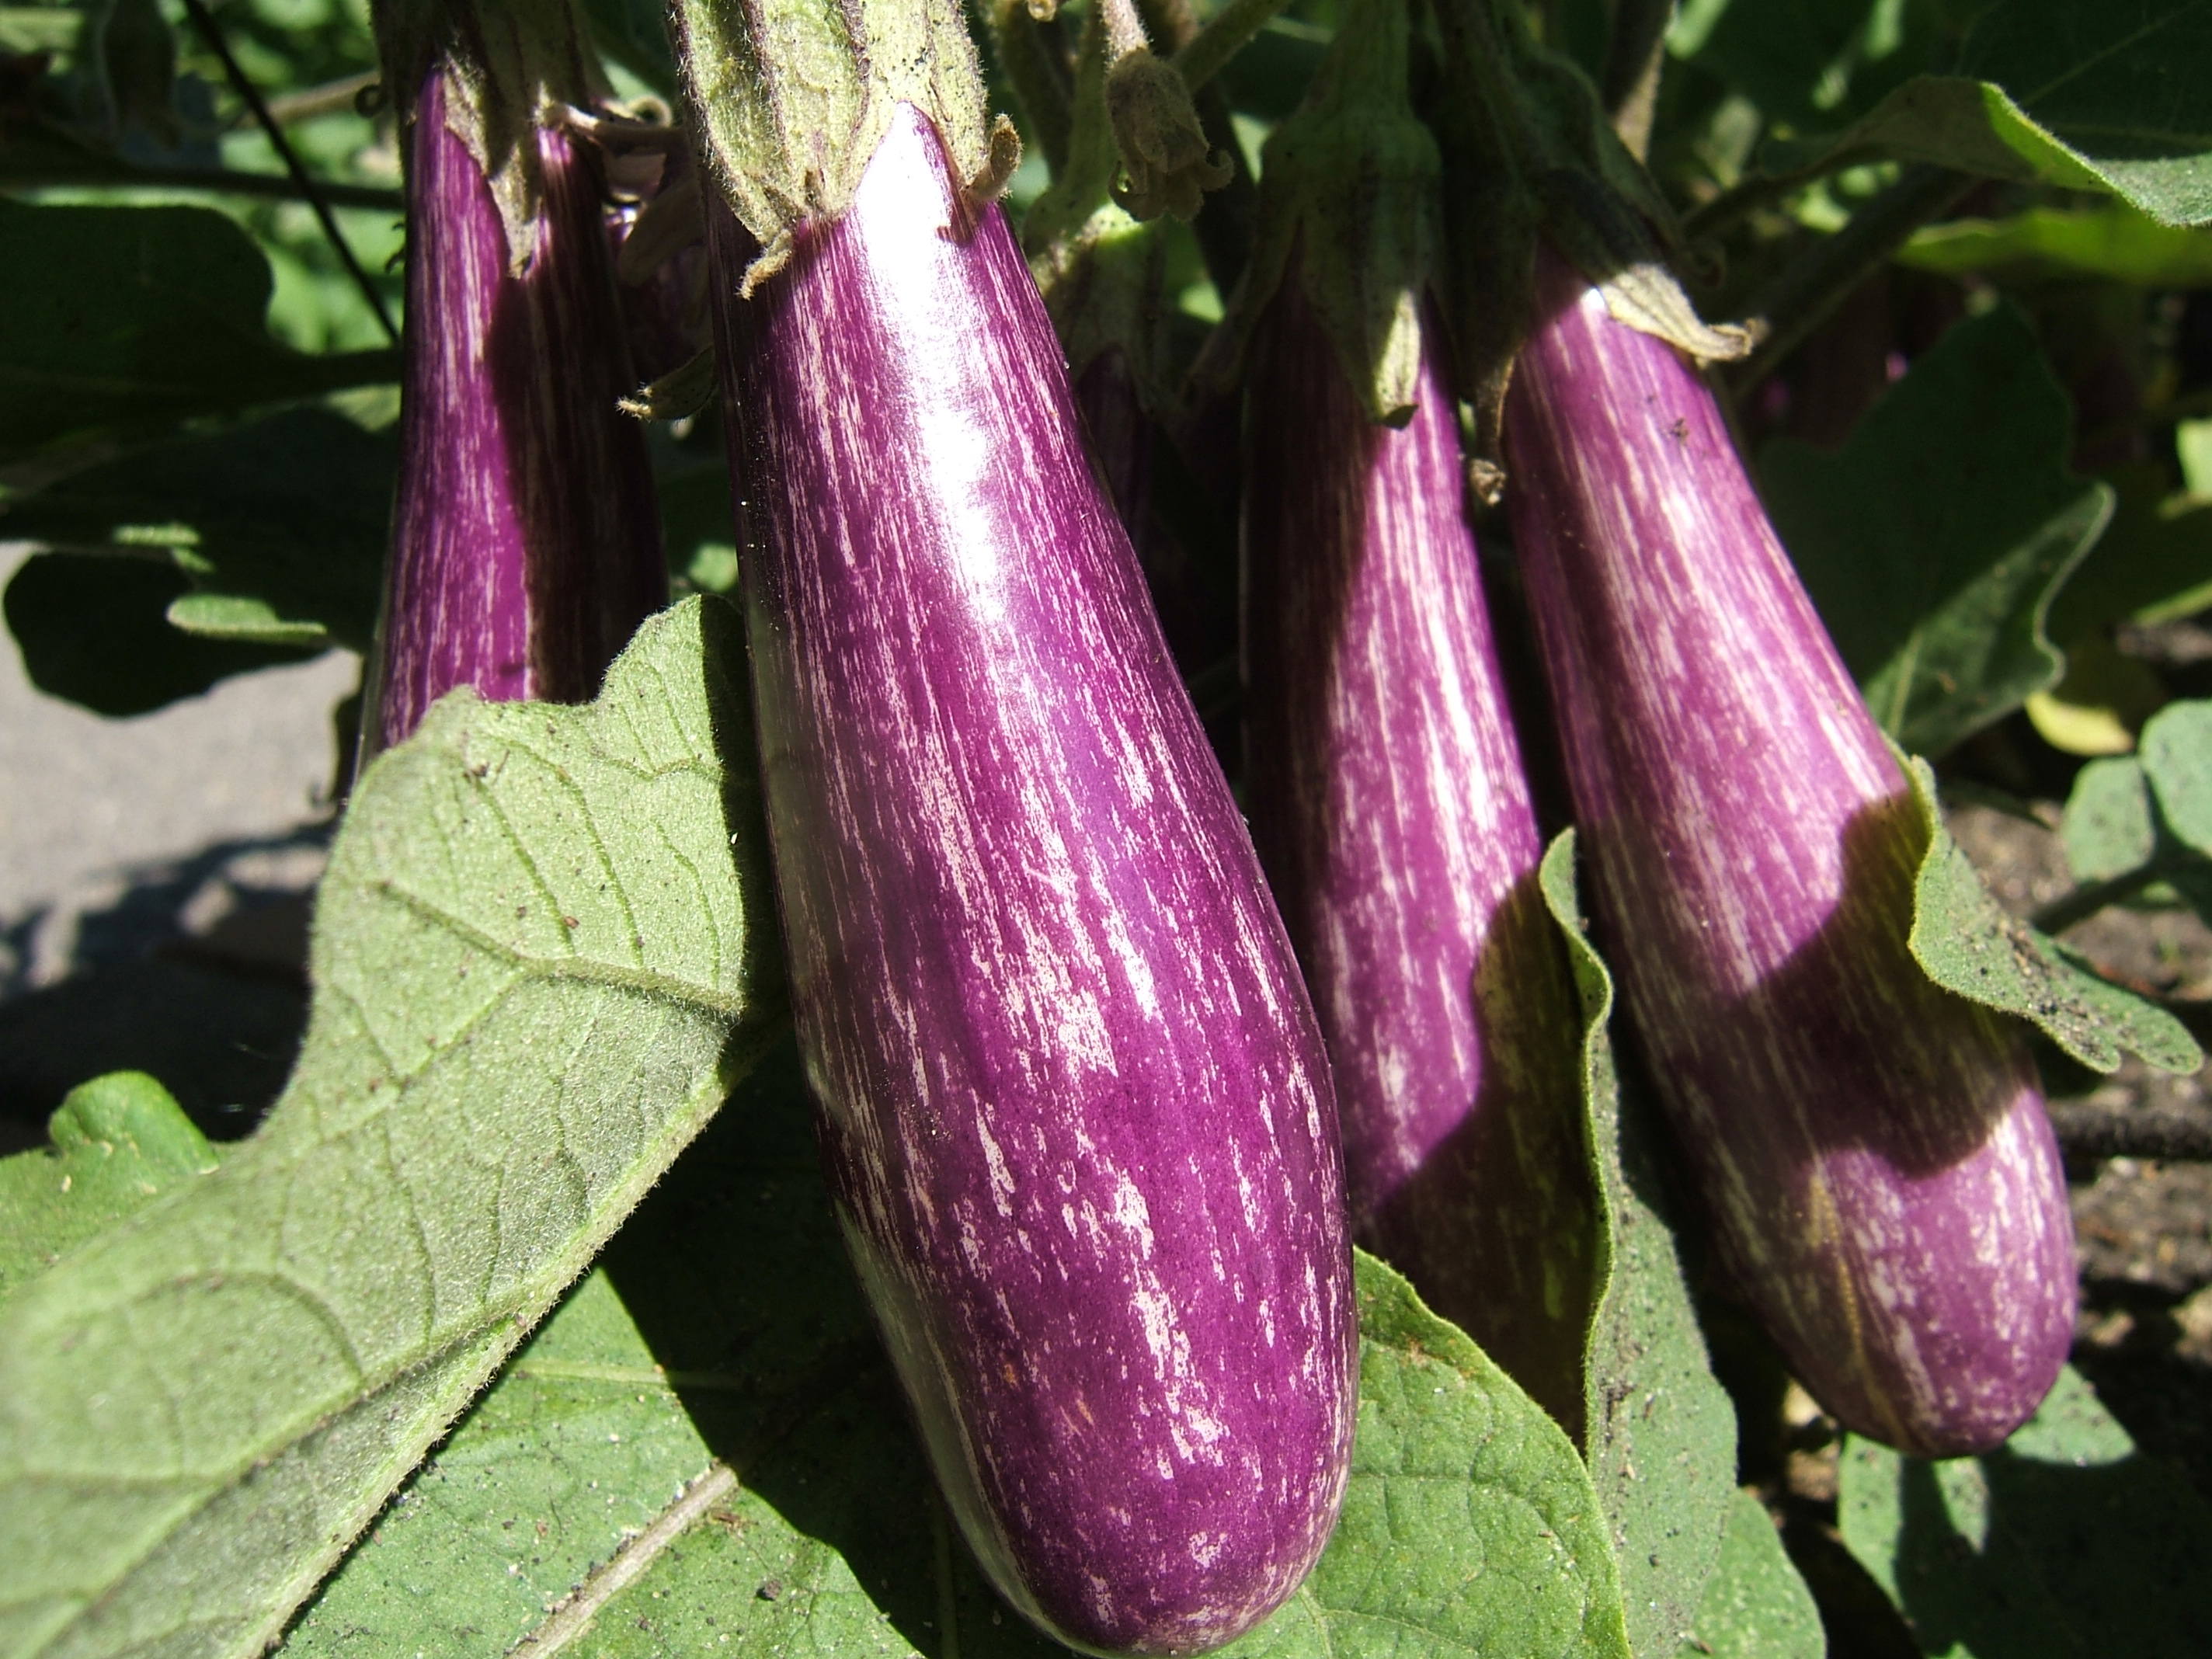 Growing eggplant in home gardens | UMN Extension